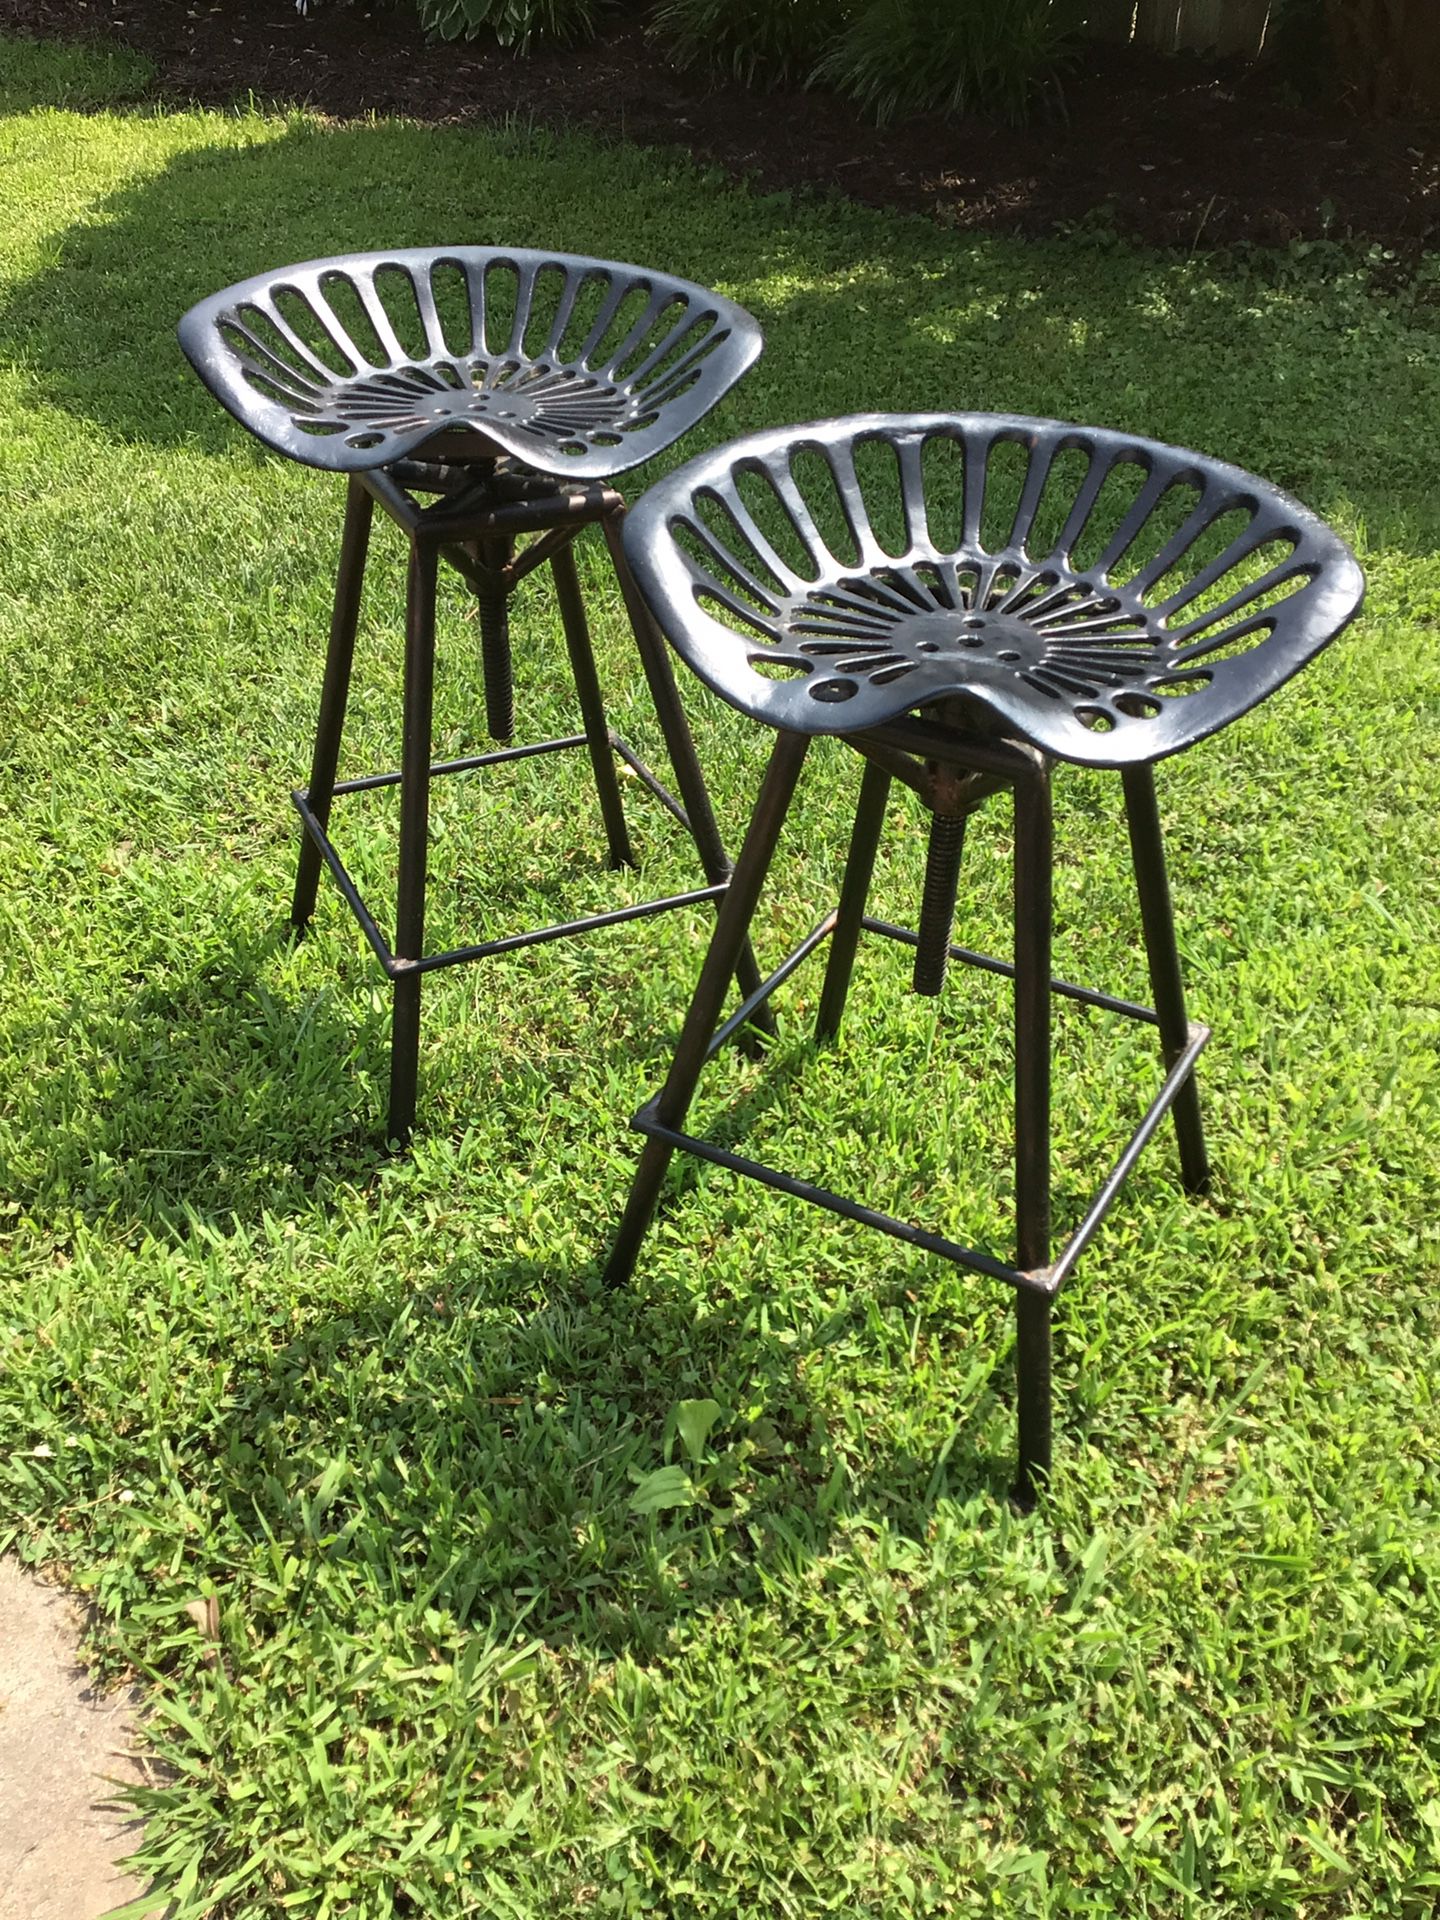 Farm House Bar Stools With Adjustable Tractor Seats…like New Condition…